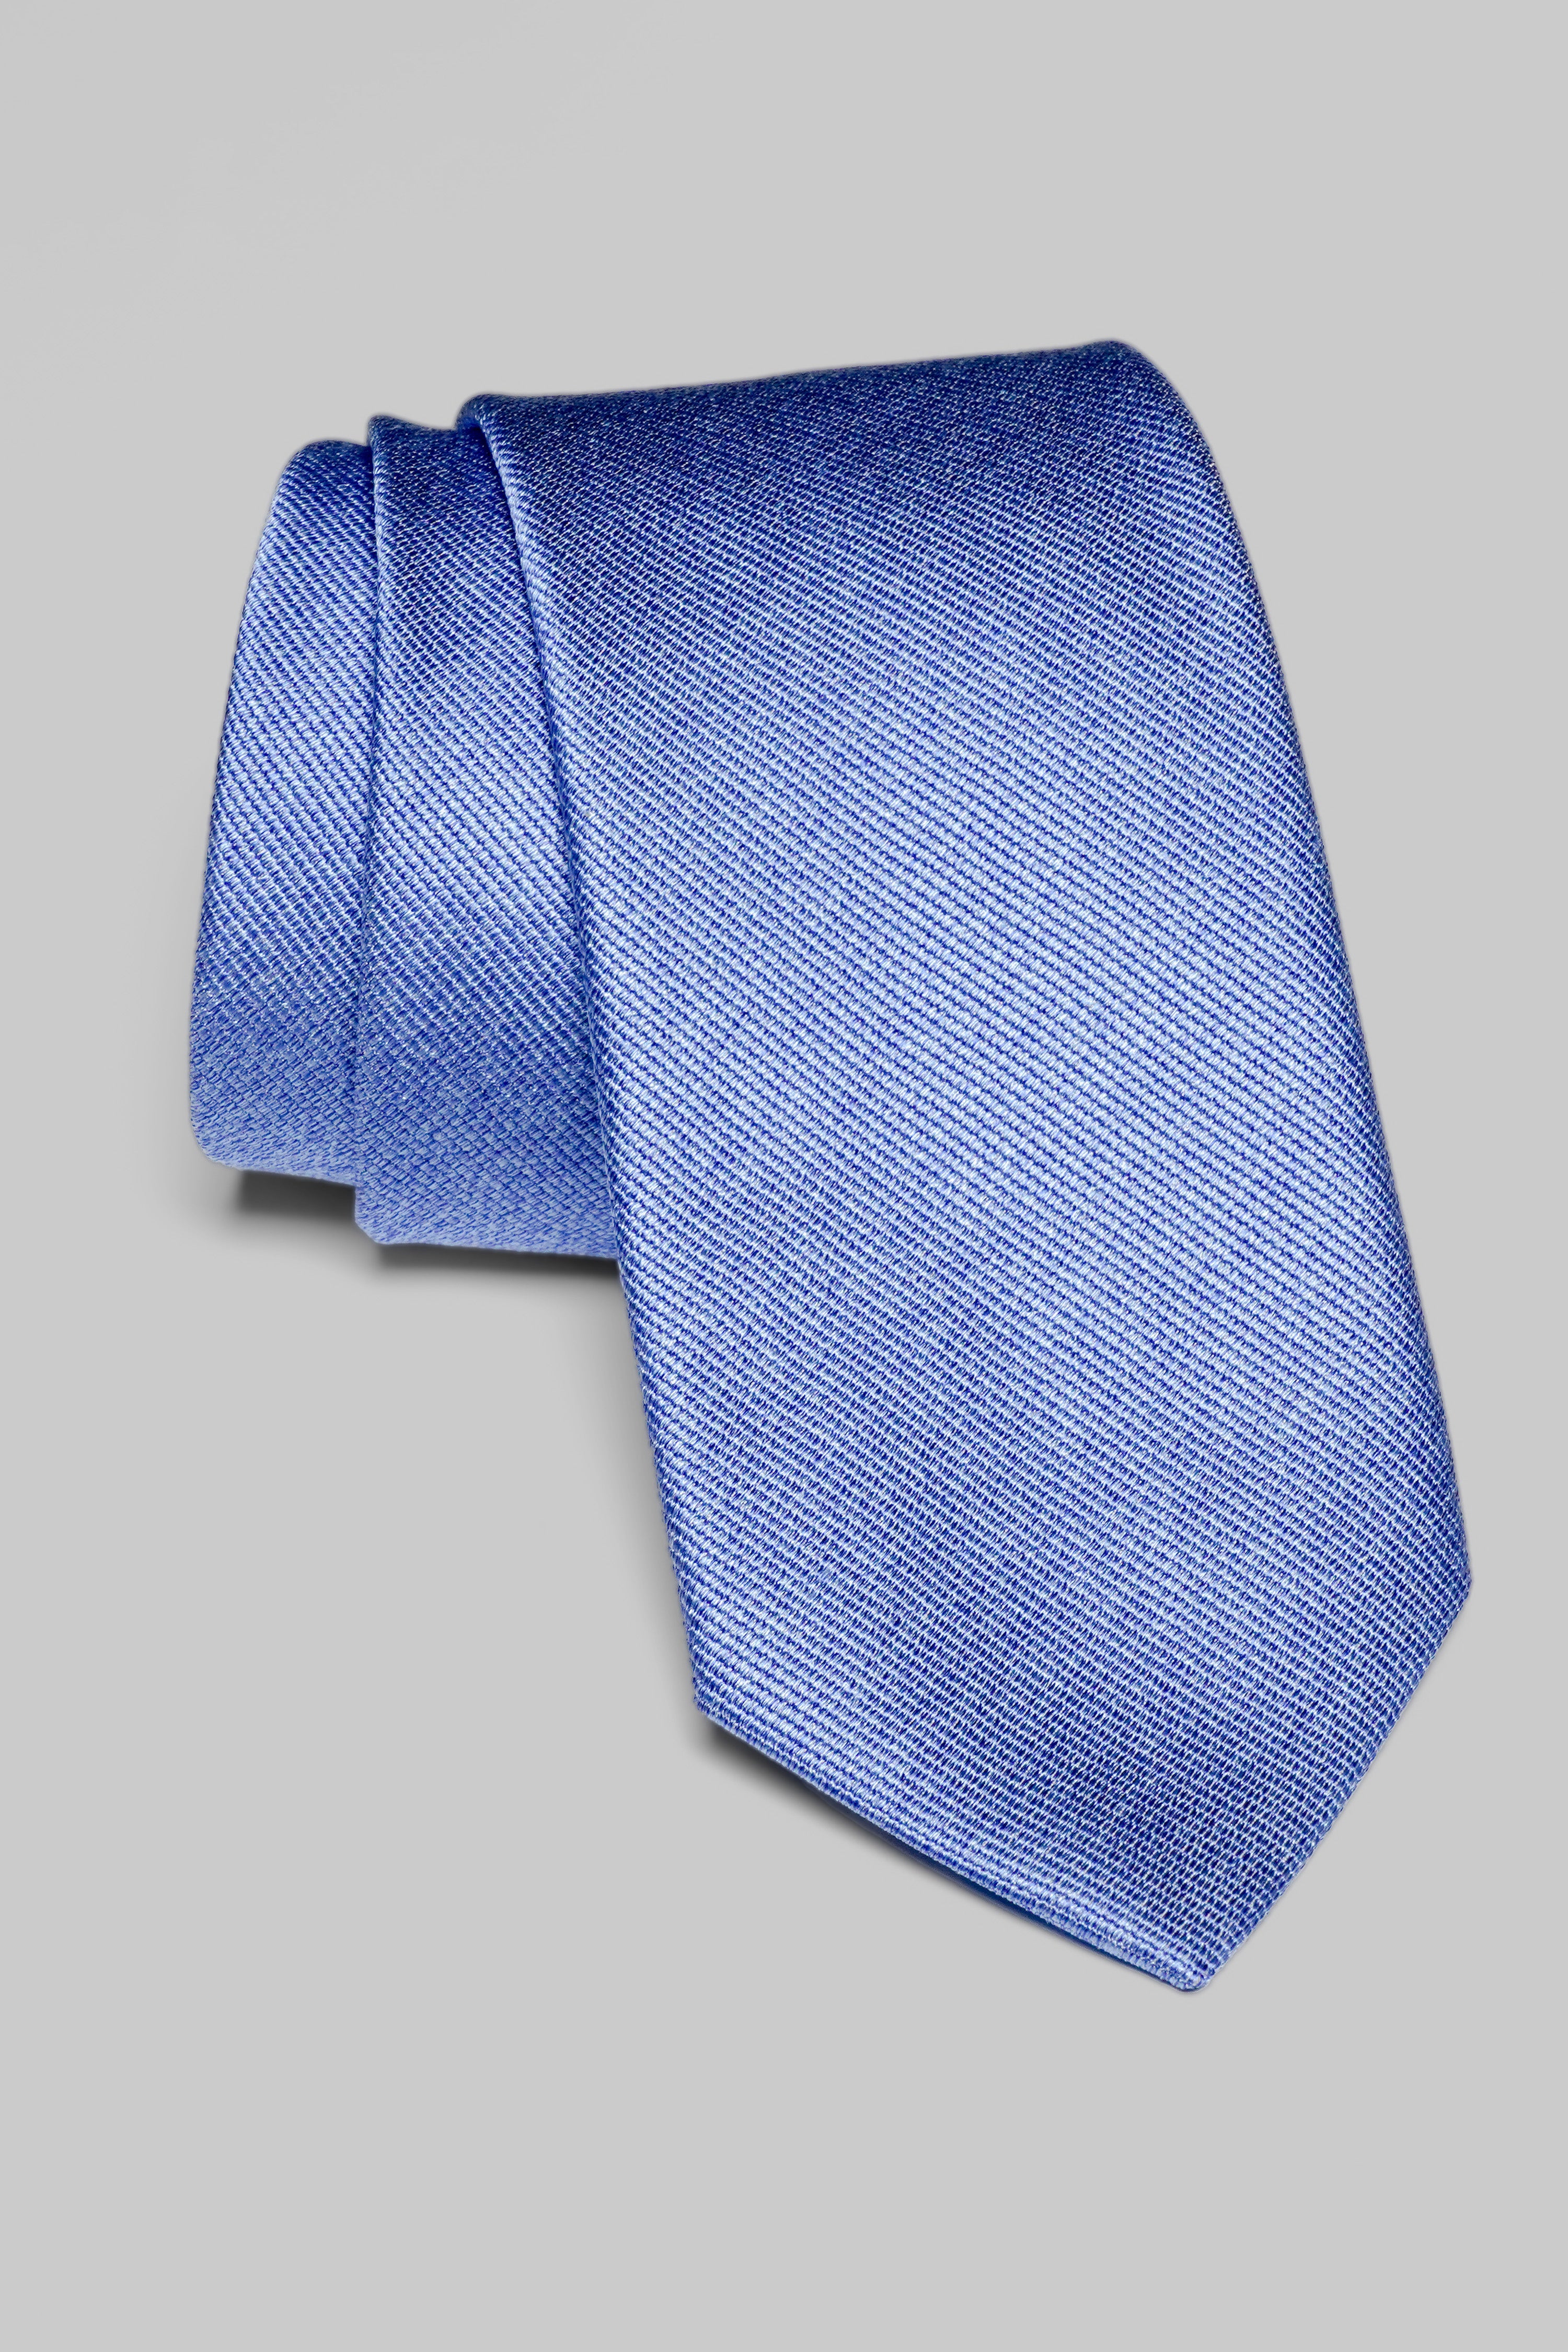 Alt view Bowman Solid Woven Tie in Palace Blue